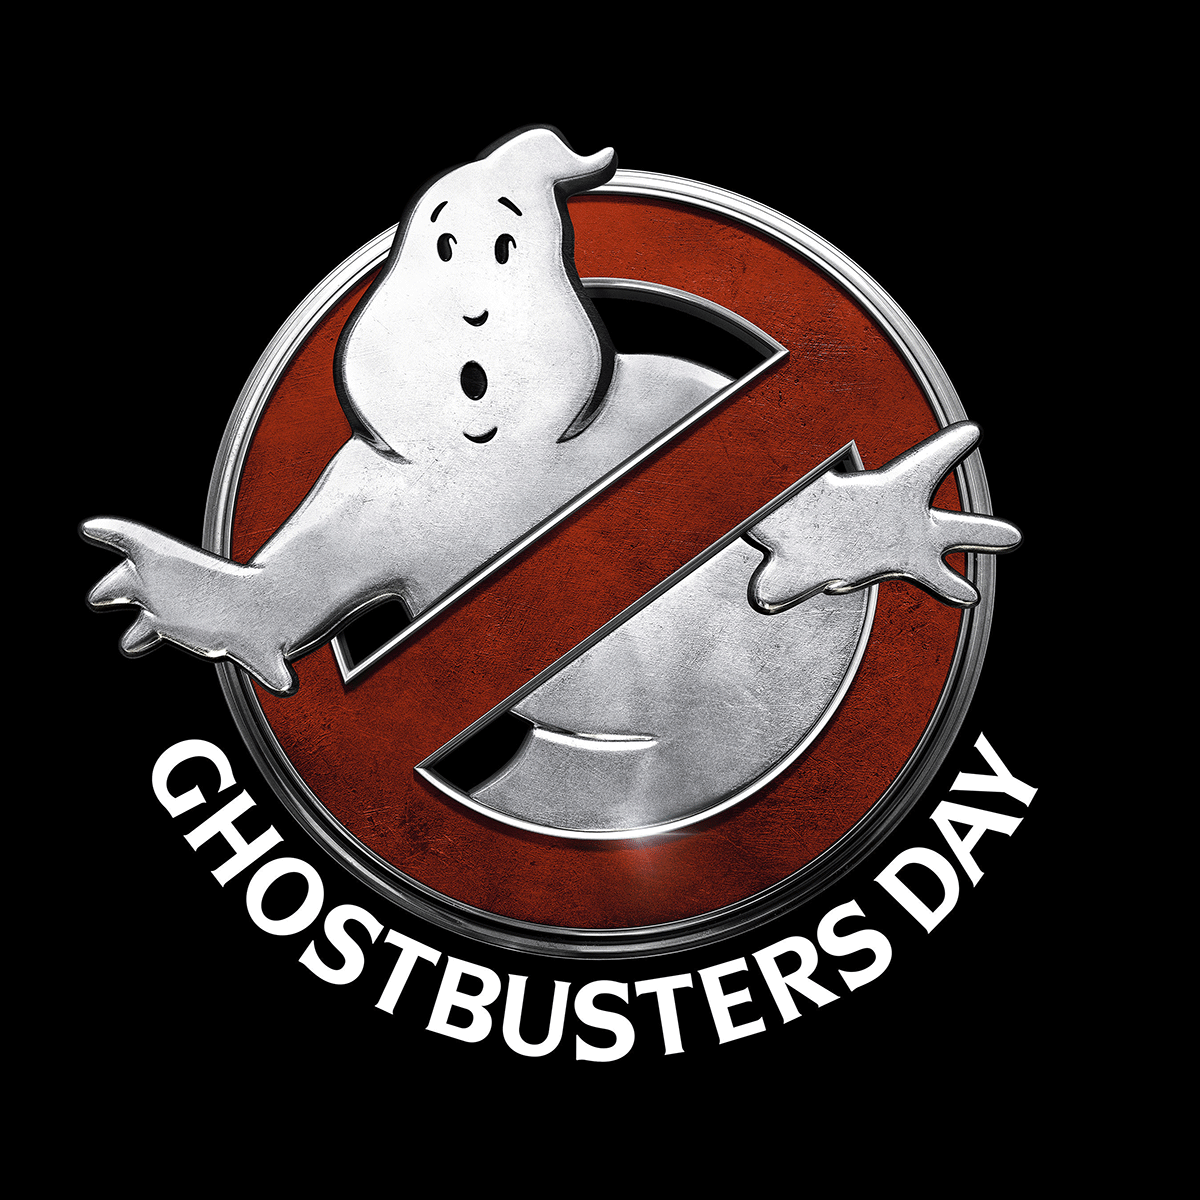 Ghostbusters Day logo